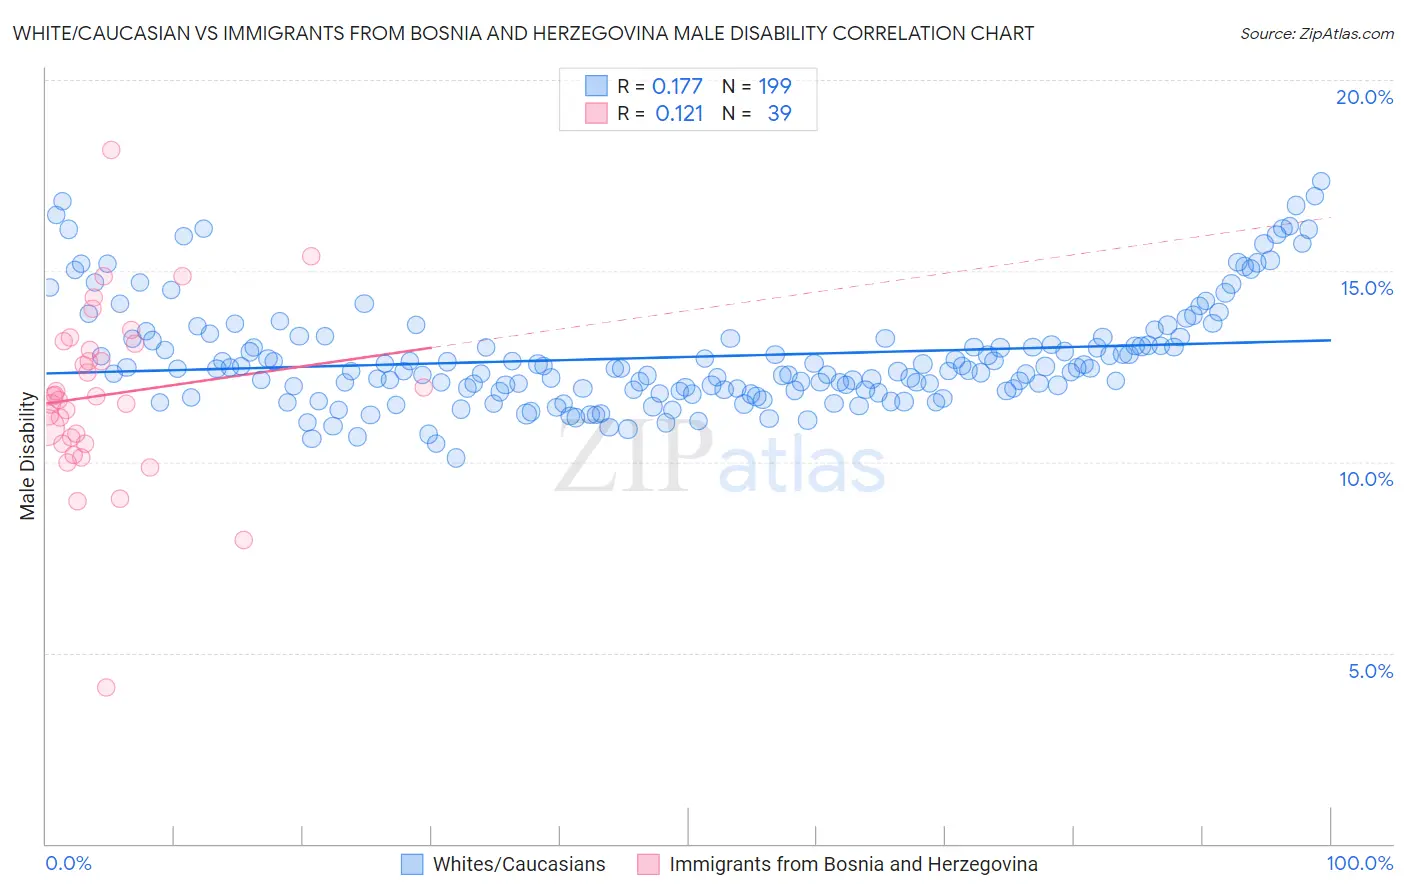 White/Caucasian vs Immigrants from Bosnia and Herzegovina Male Disability